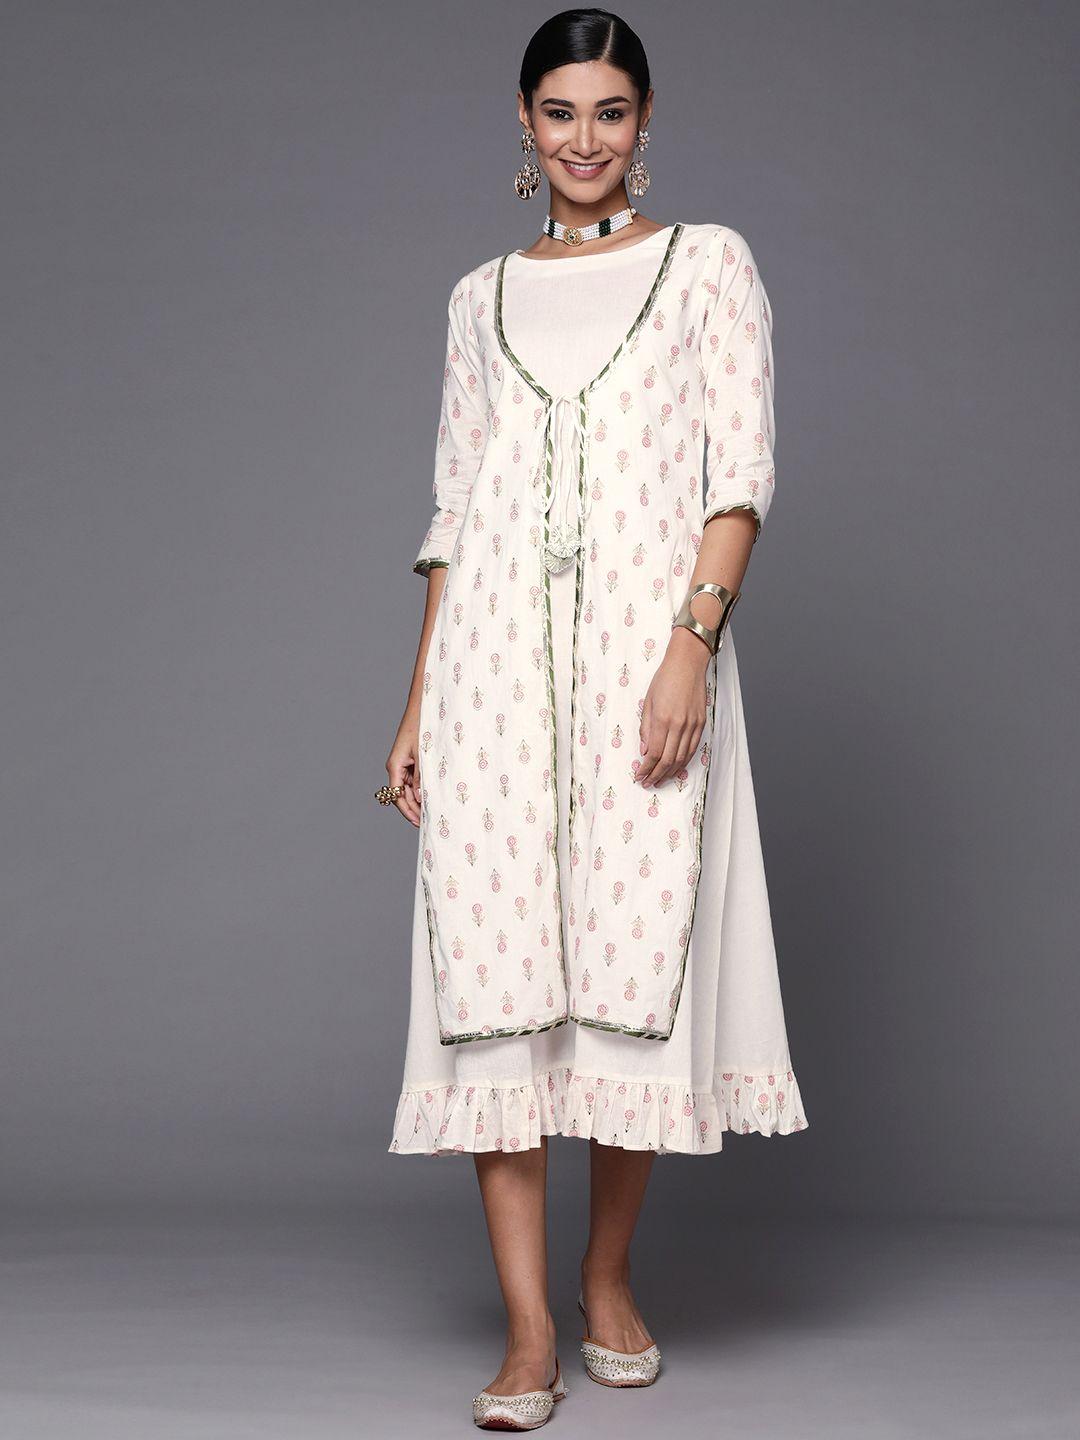 ahalyaa off white & pink floral print a-line midi dress